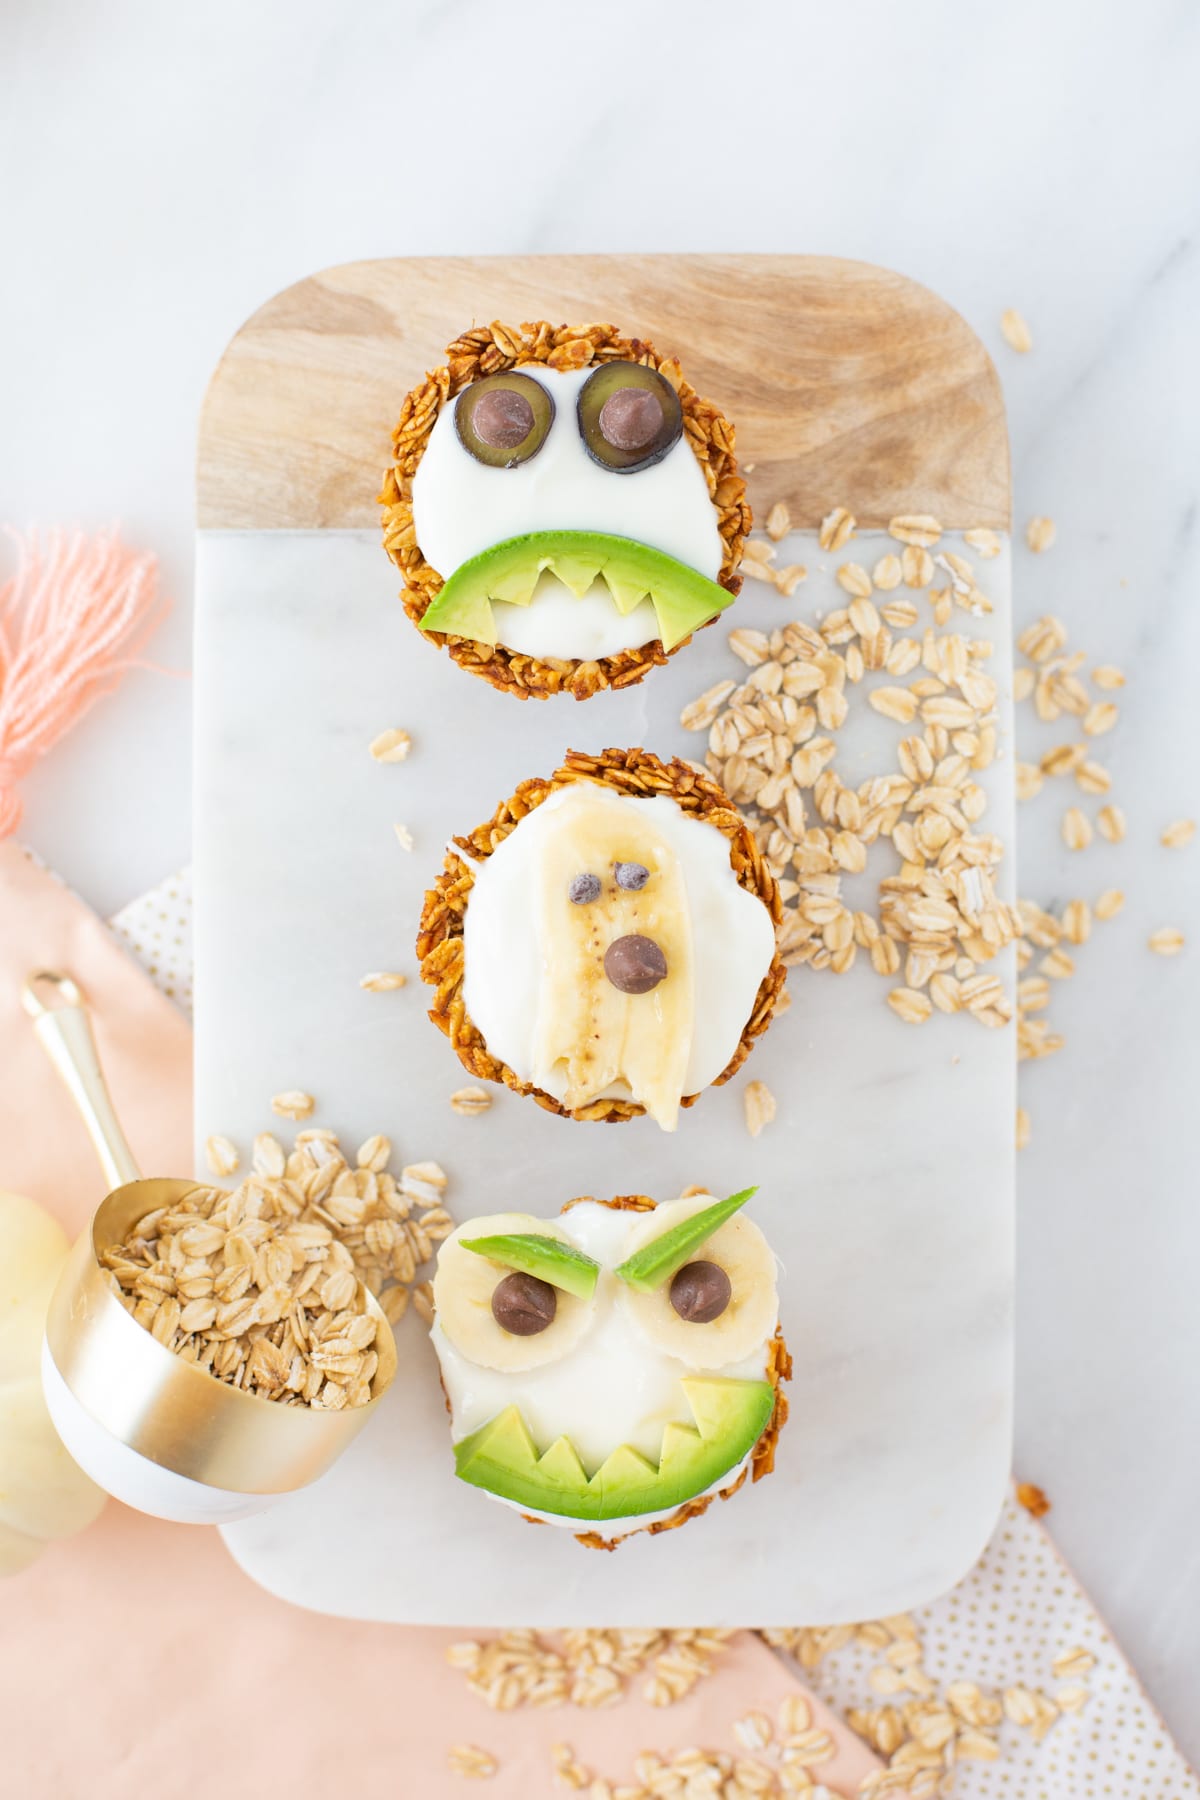 You are currently viewing The Healthy Halloween Treat Your Kids will LOVE!